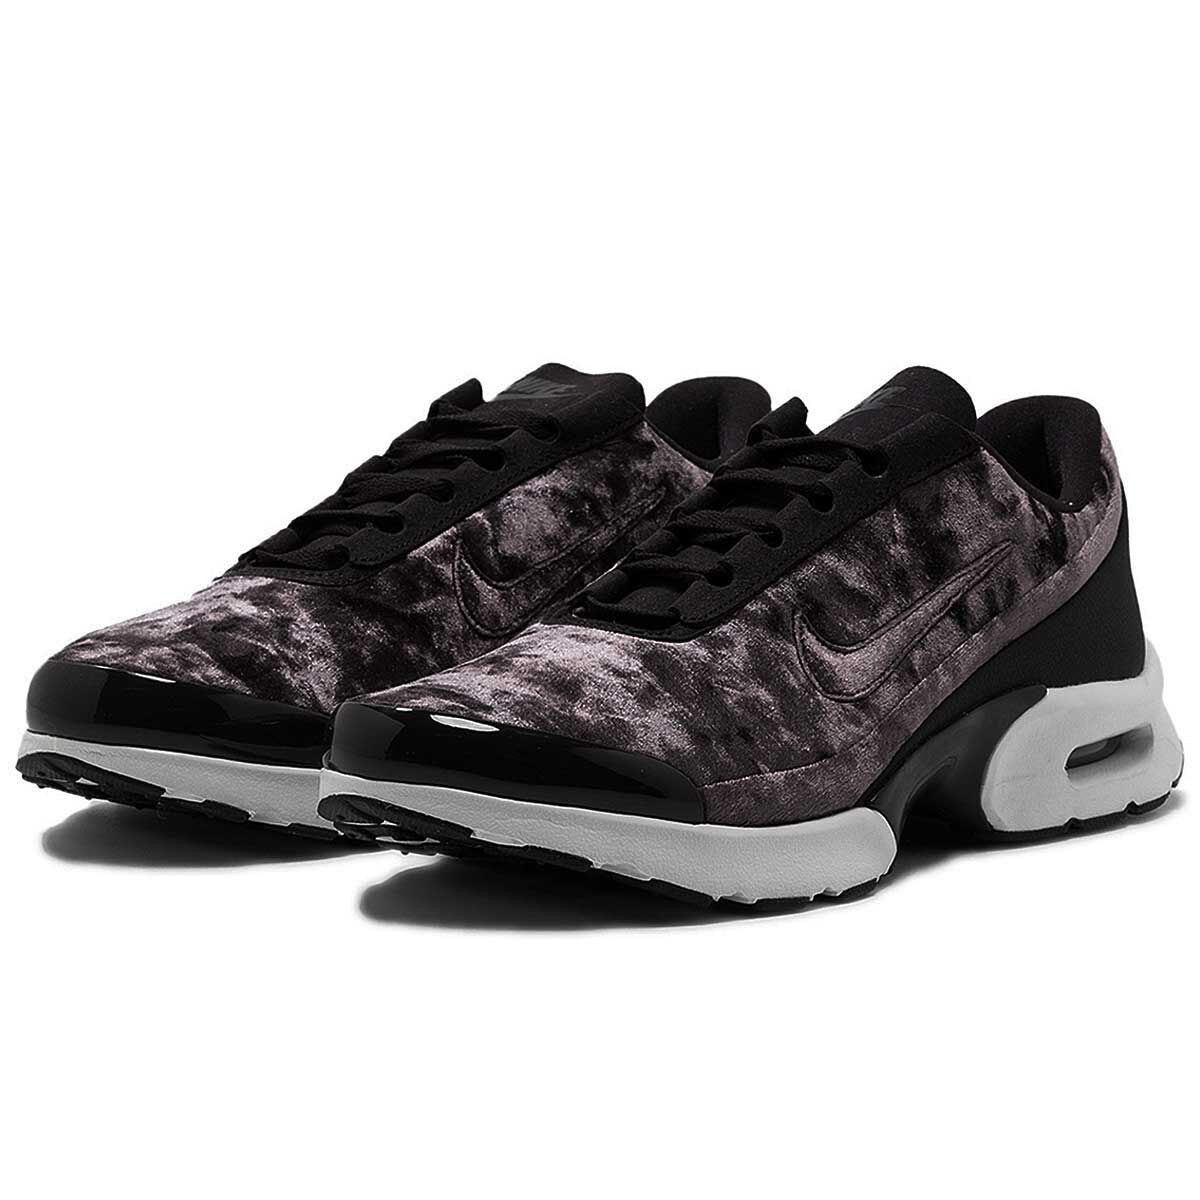 Buy W NIKE AIR MAX JEWELL PRM for N/A 0 